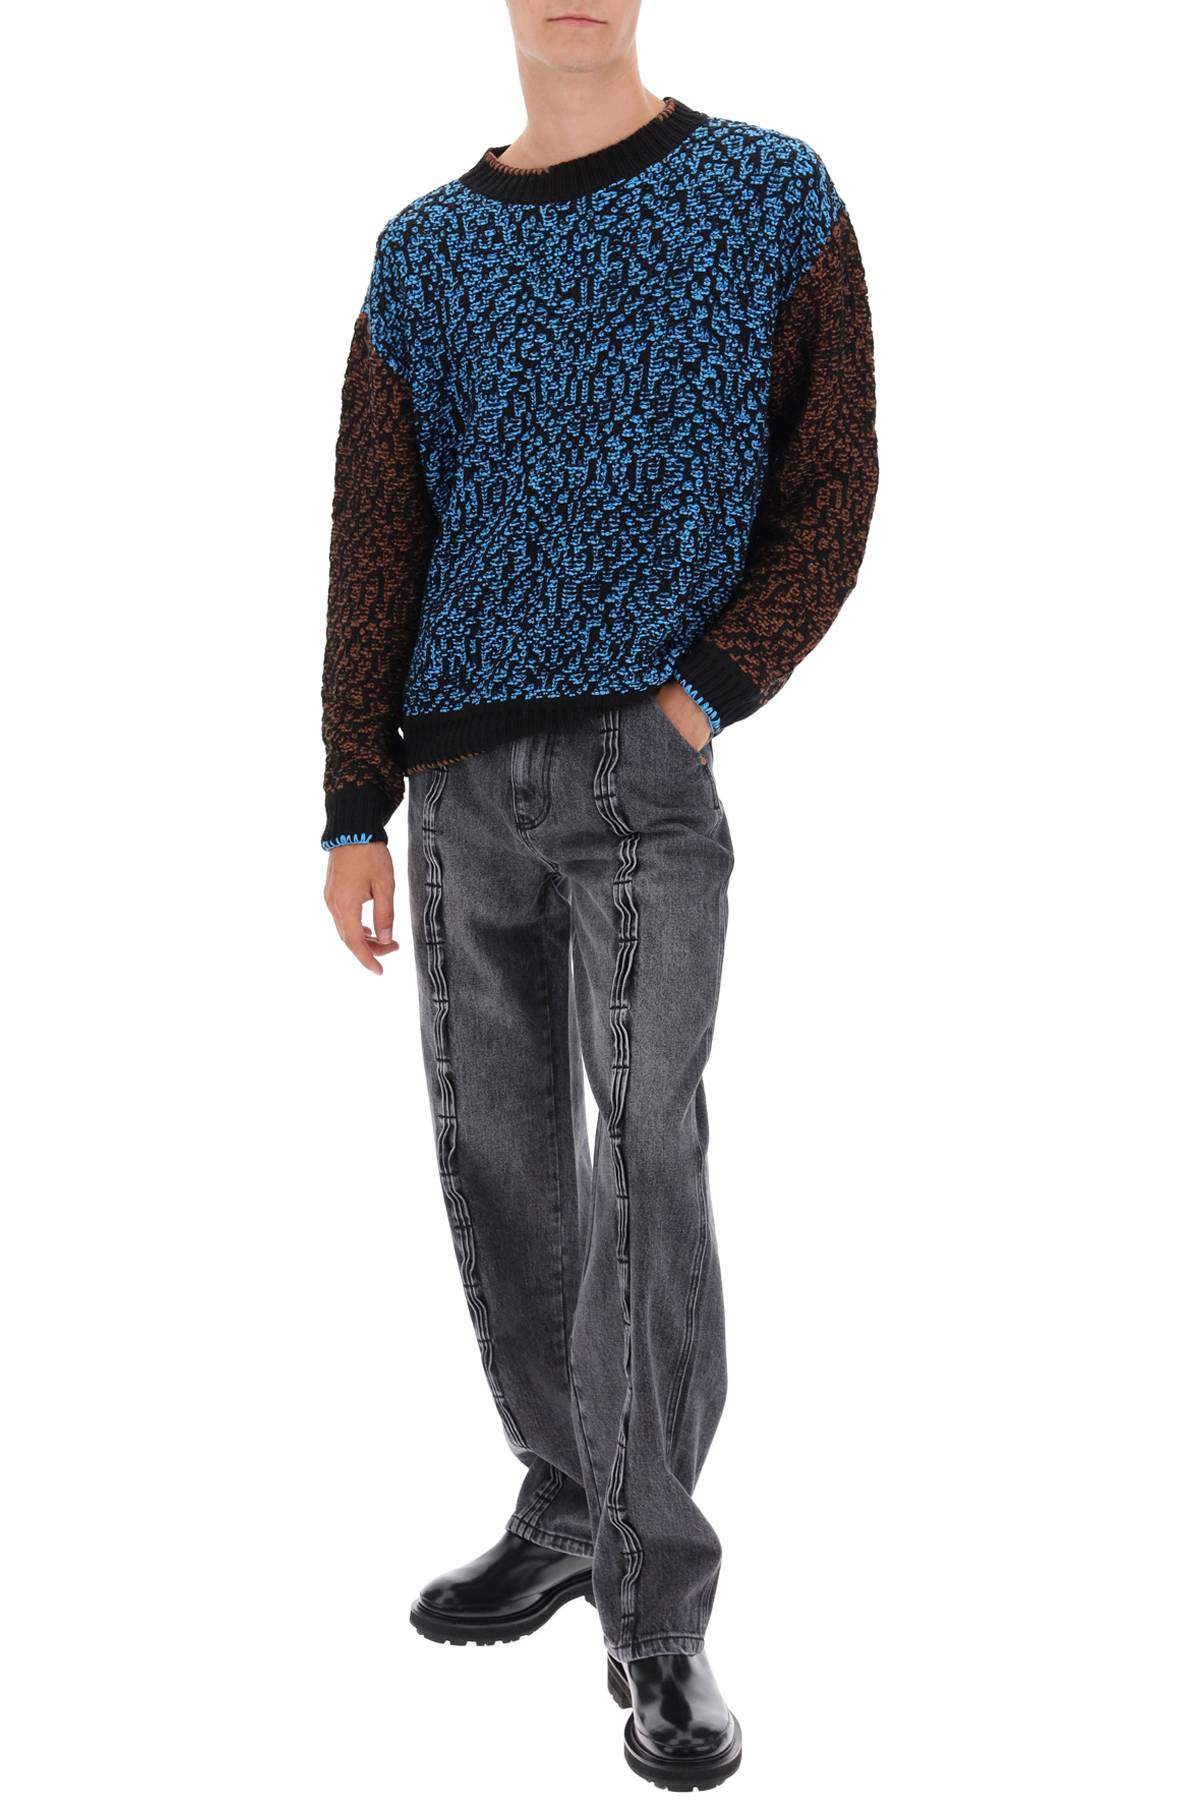 Shop Andersson Bell Multicolored Net Cotton Blend Sweater